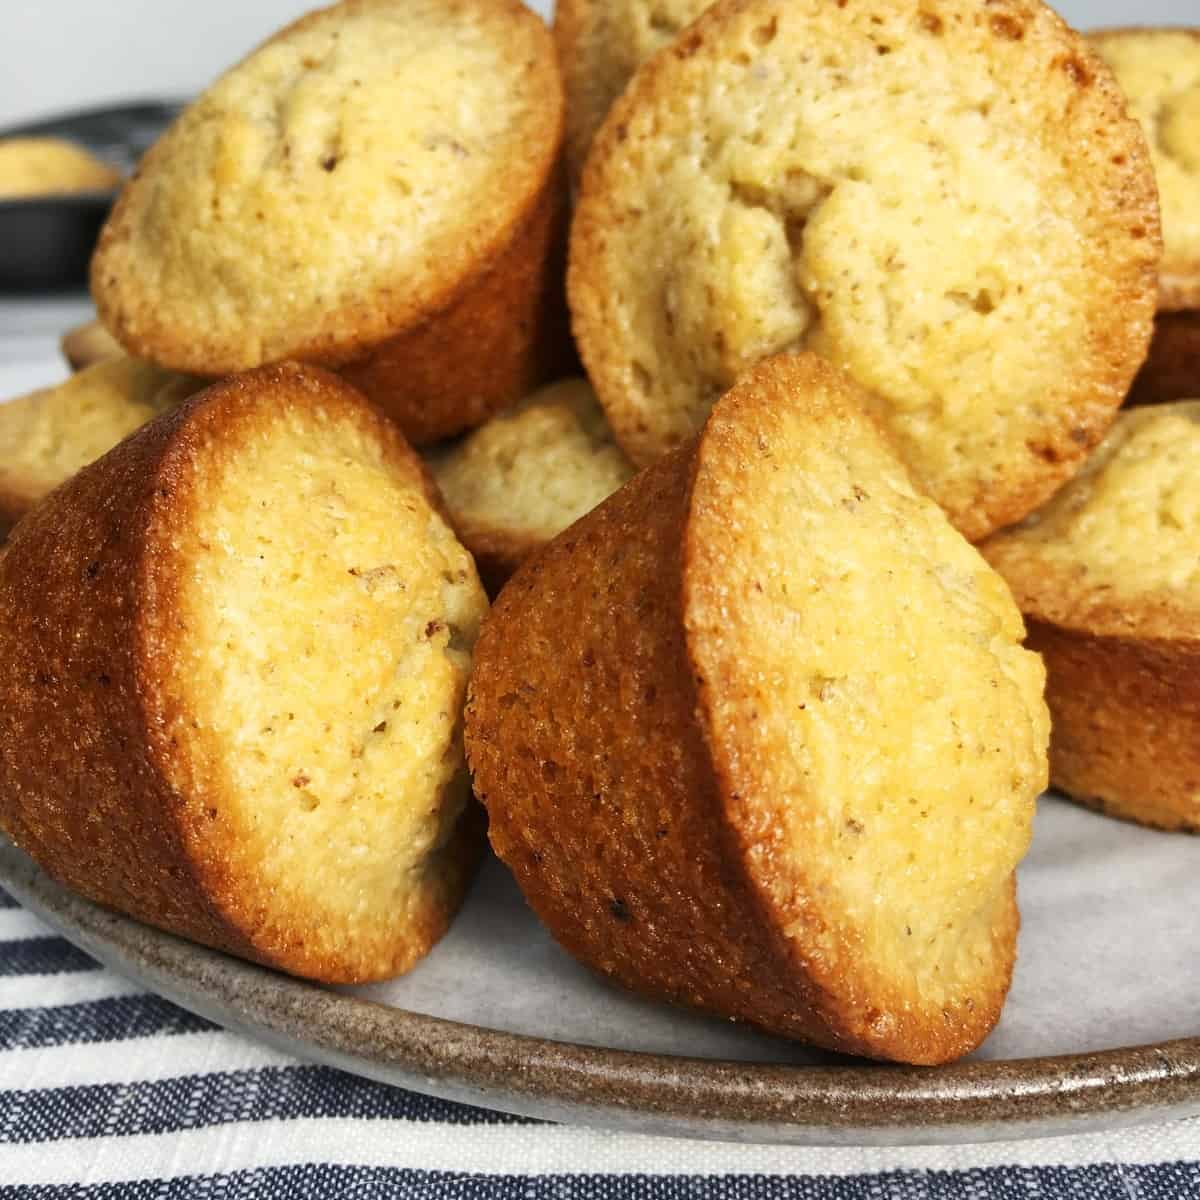 A batch of brown butter French financiers on a grey dessert plate